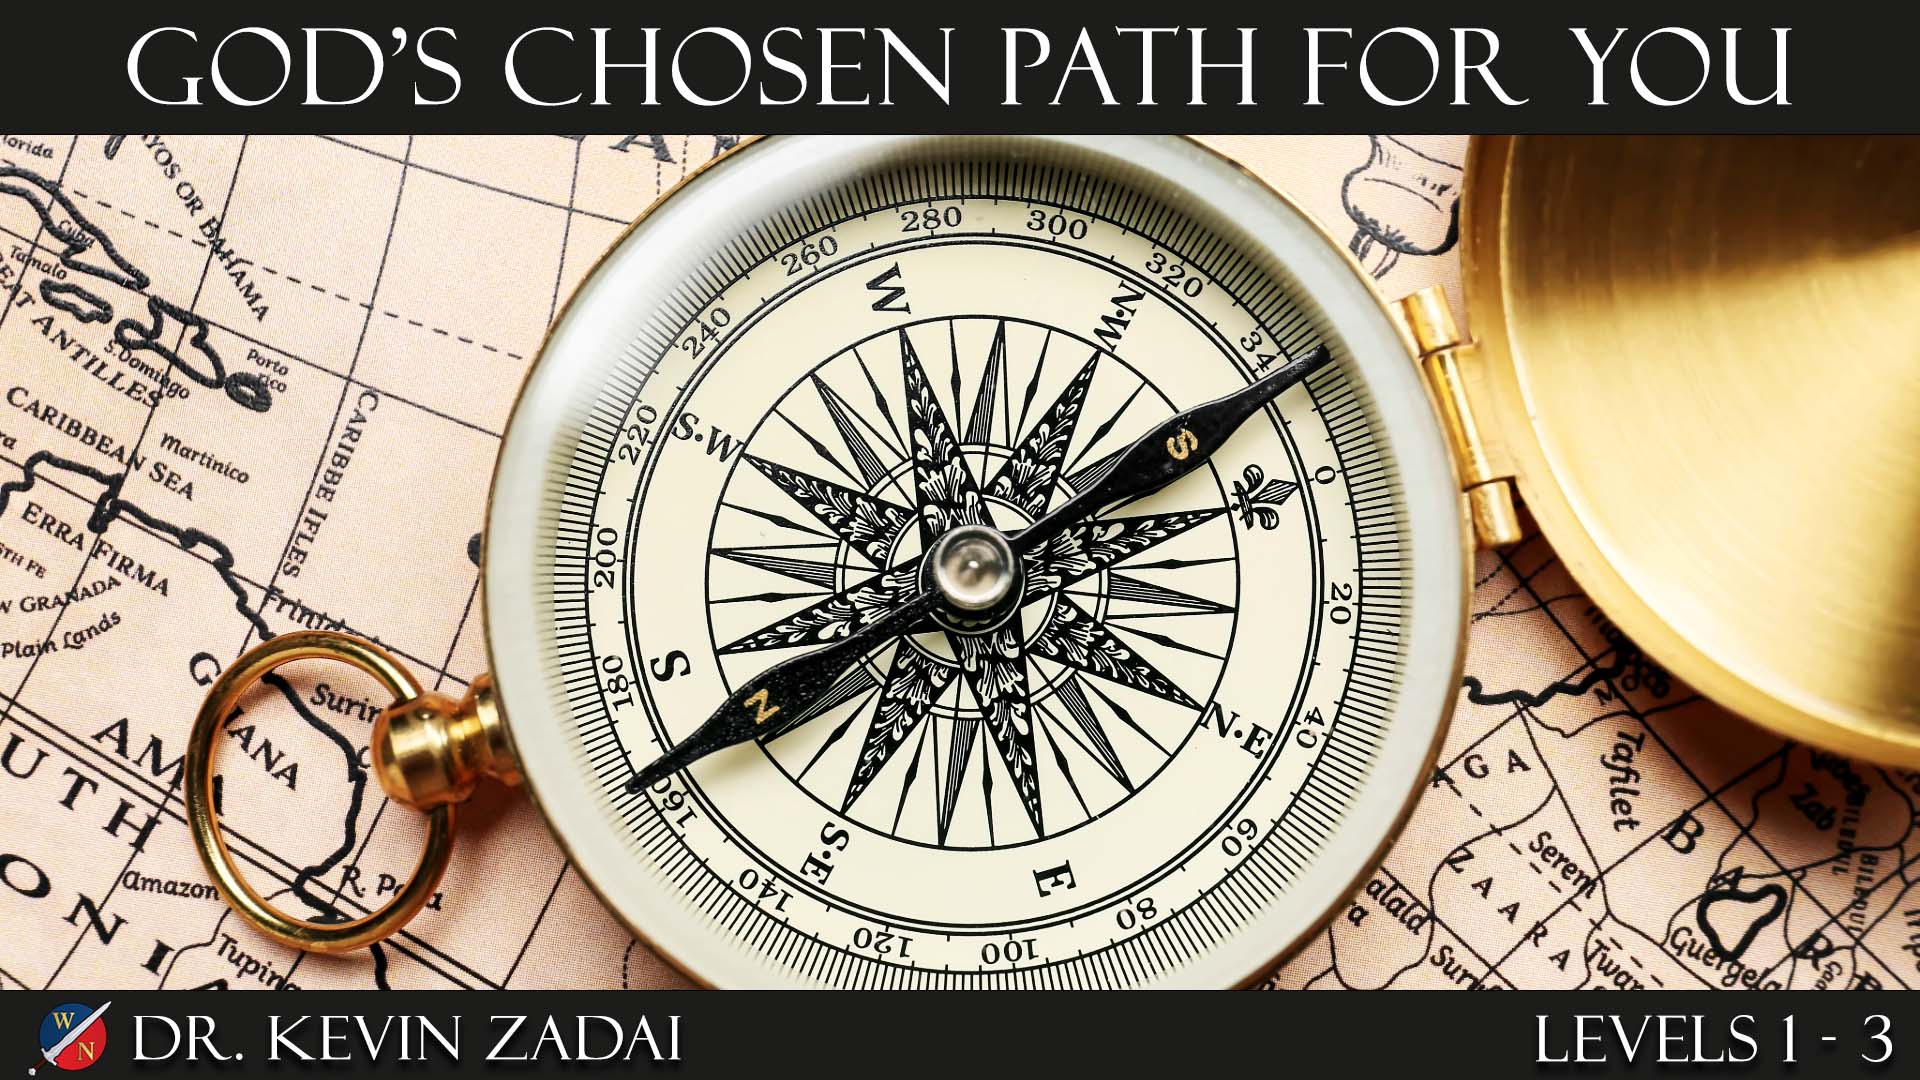 God's Chosen Path for You bundle with Dr. Kevin Zadai